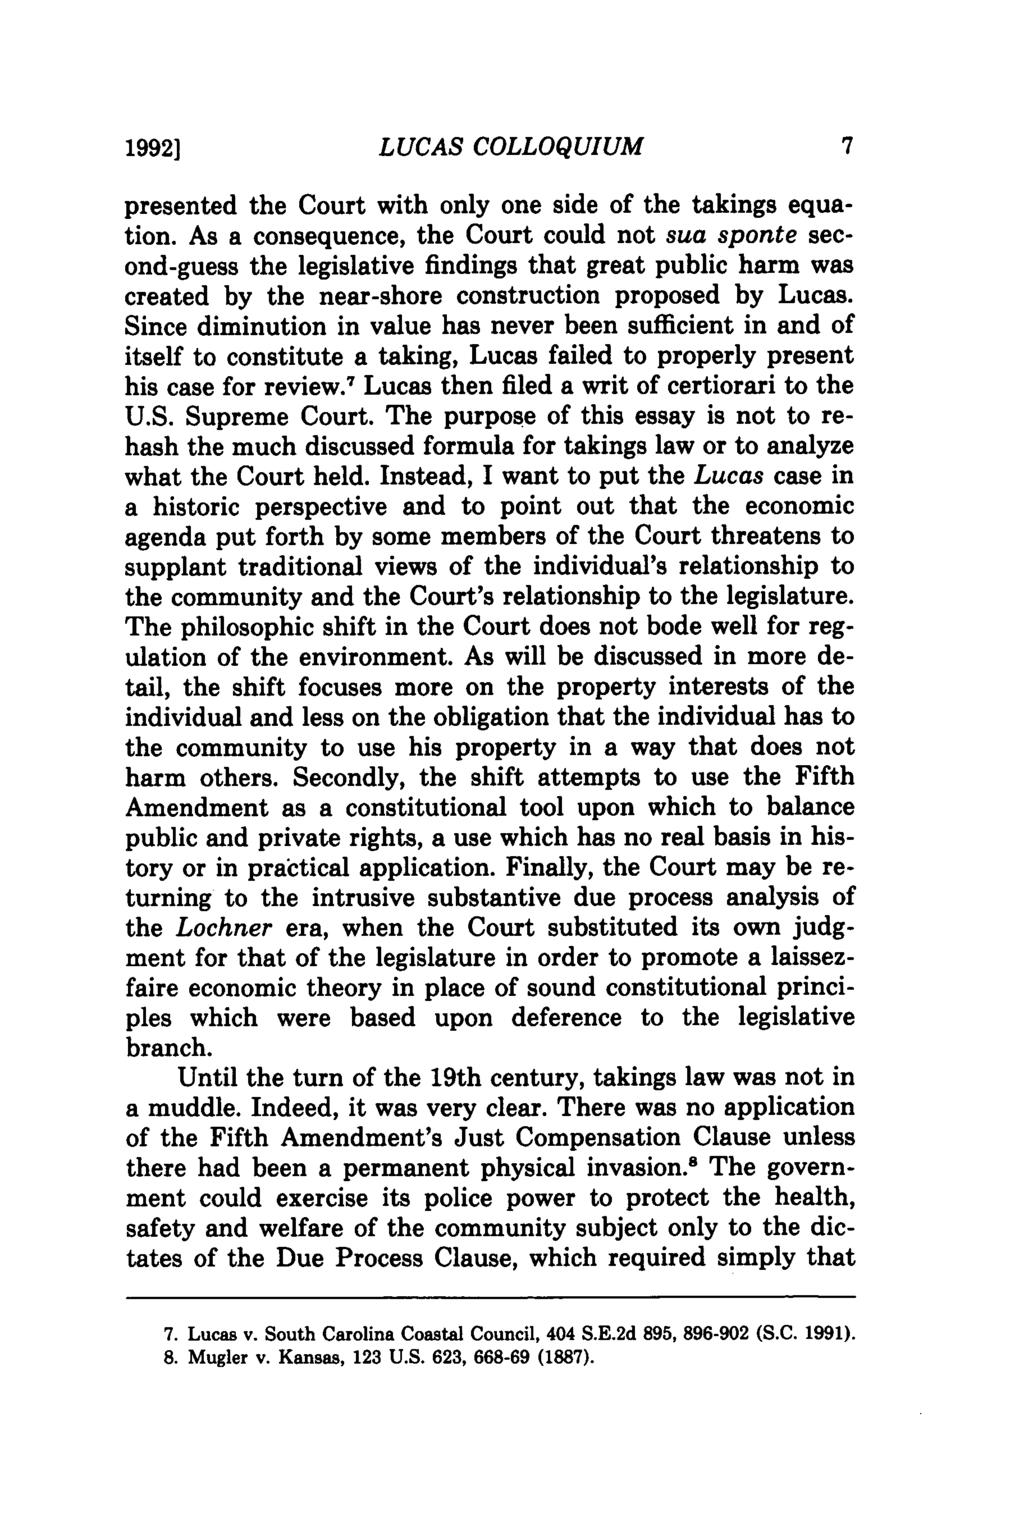 1992] LUCAS COLLOQUIUM presented the Court with only one side of the takings equation.